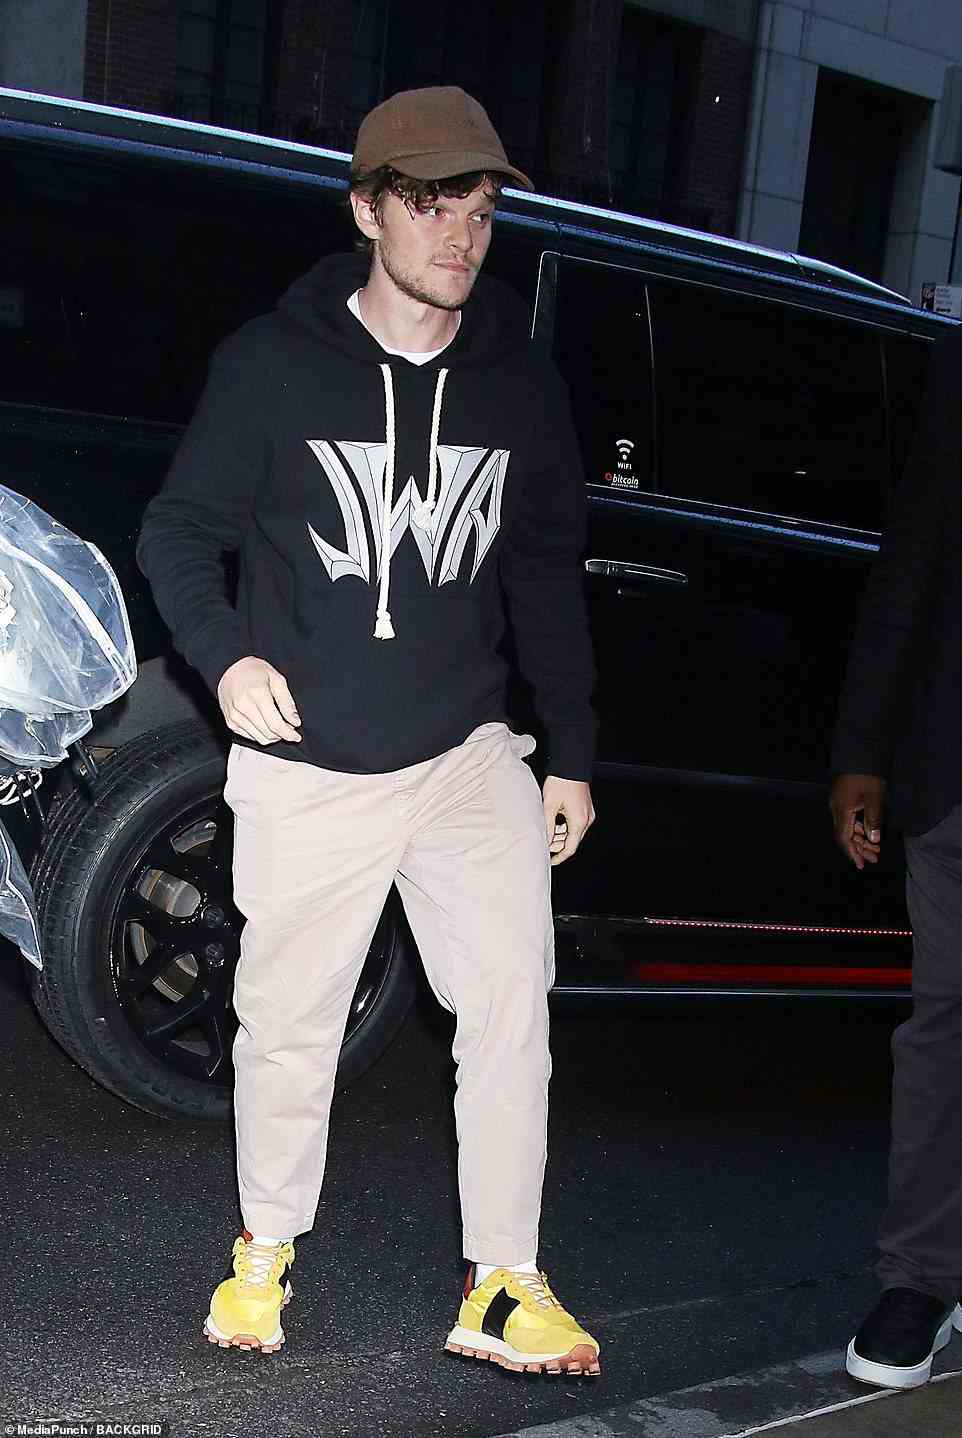 Casual: Looking ultra comfortable was Robert Aramayo, who arrived in a black hooded sweatshirt and baggy trousers